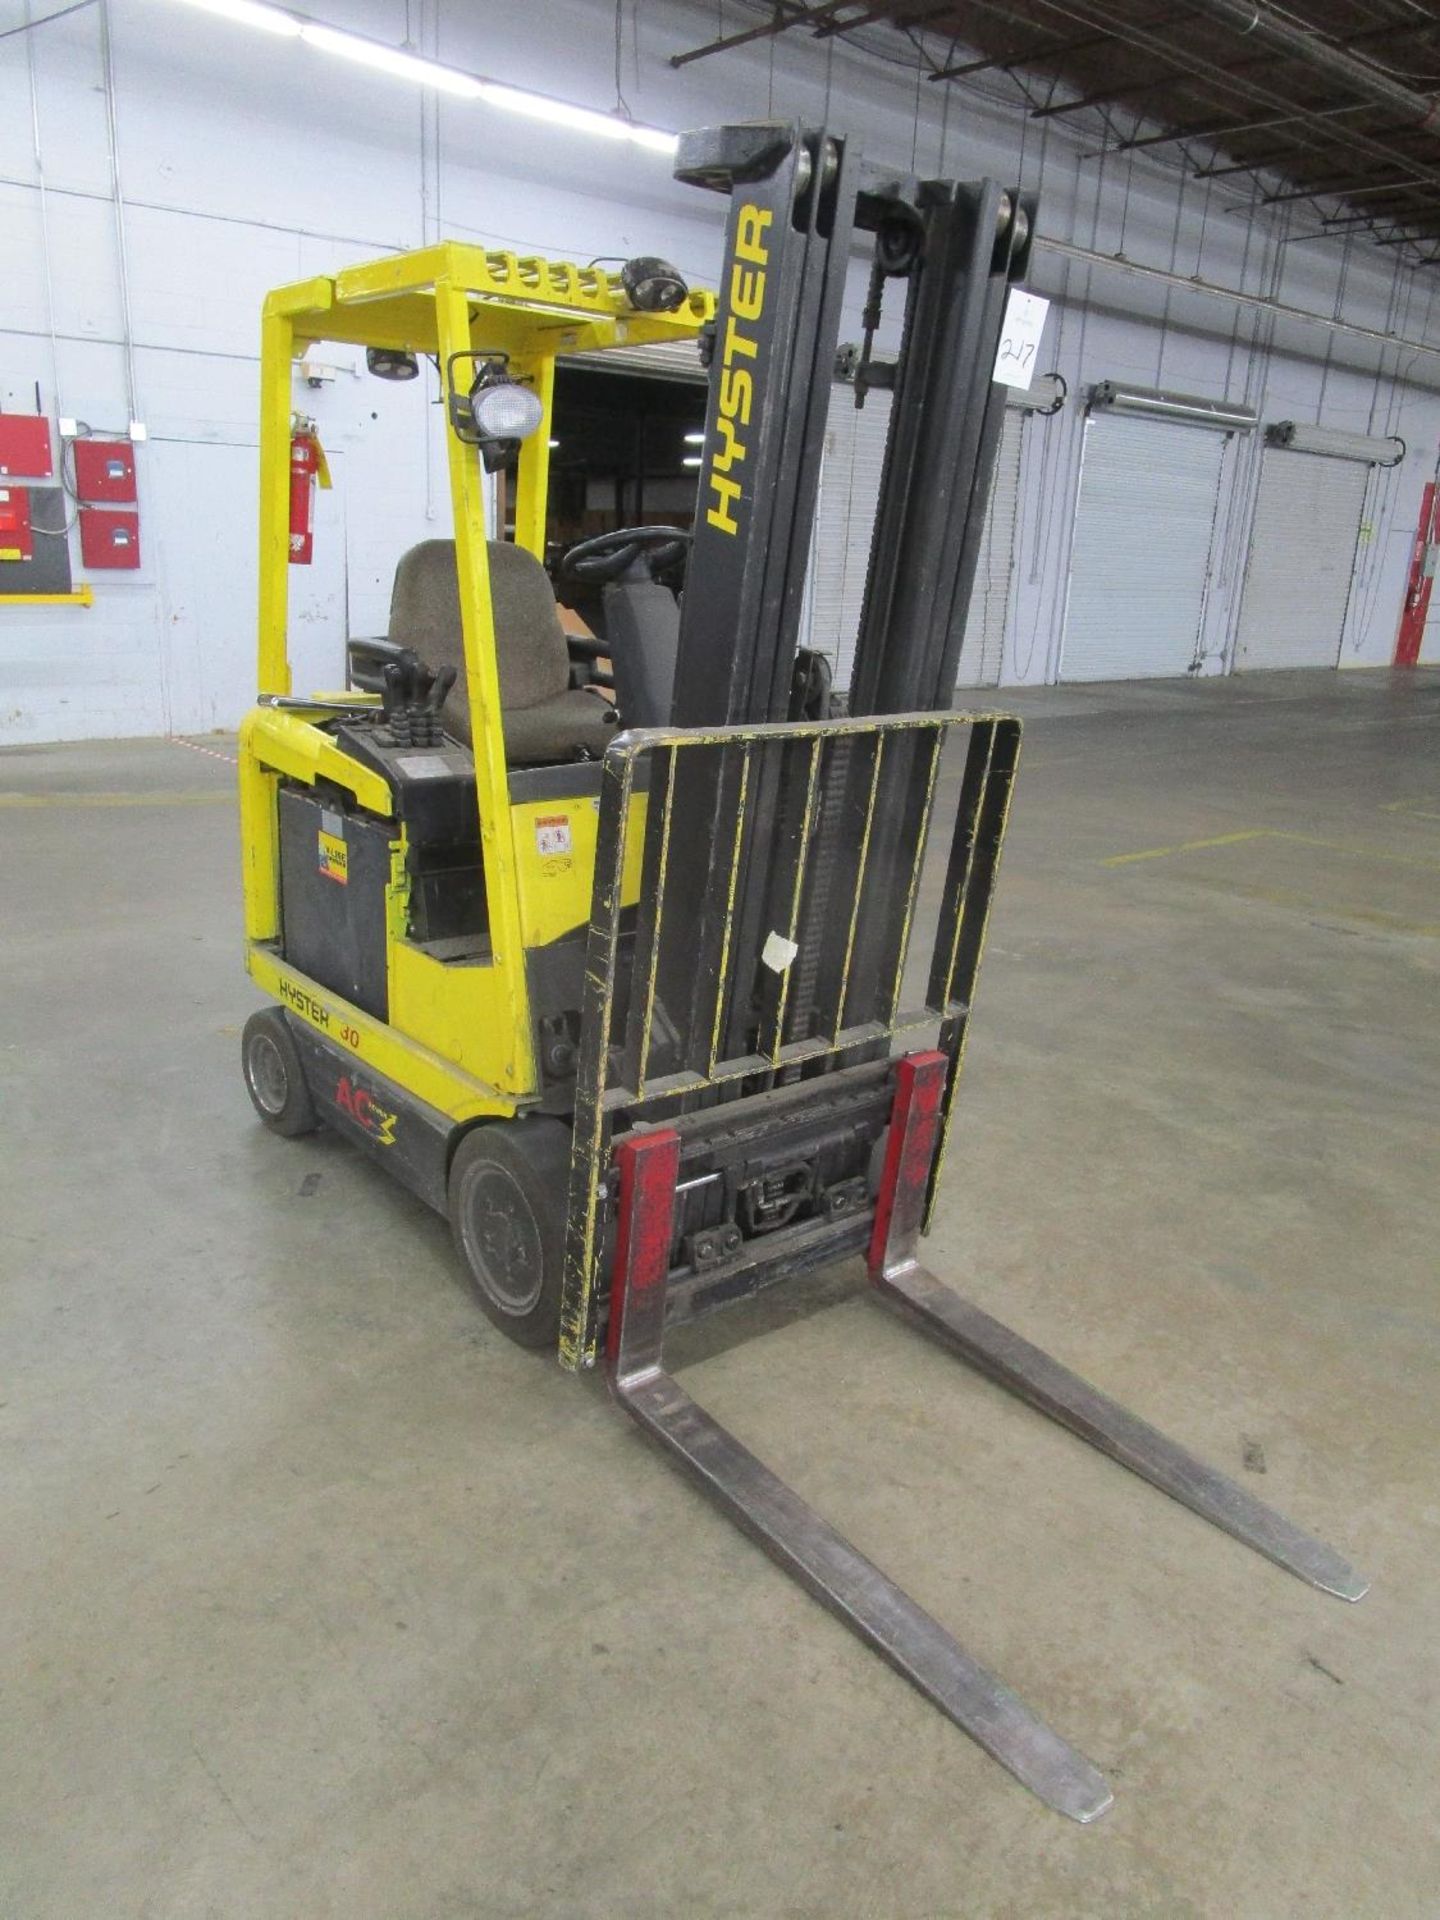 Hyster E30Z 2,850-Lb Electric Forklift Truck - Image 2 of 5